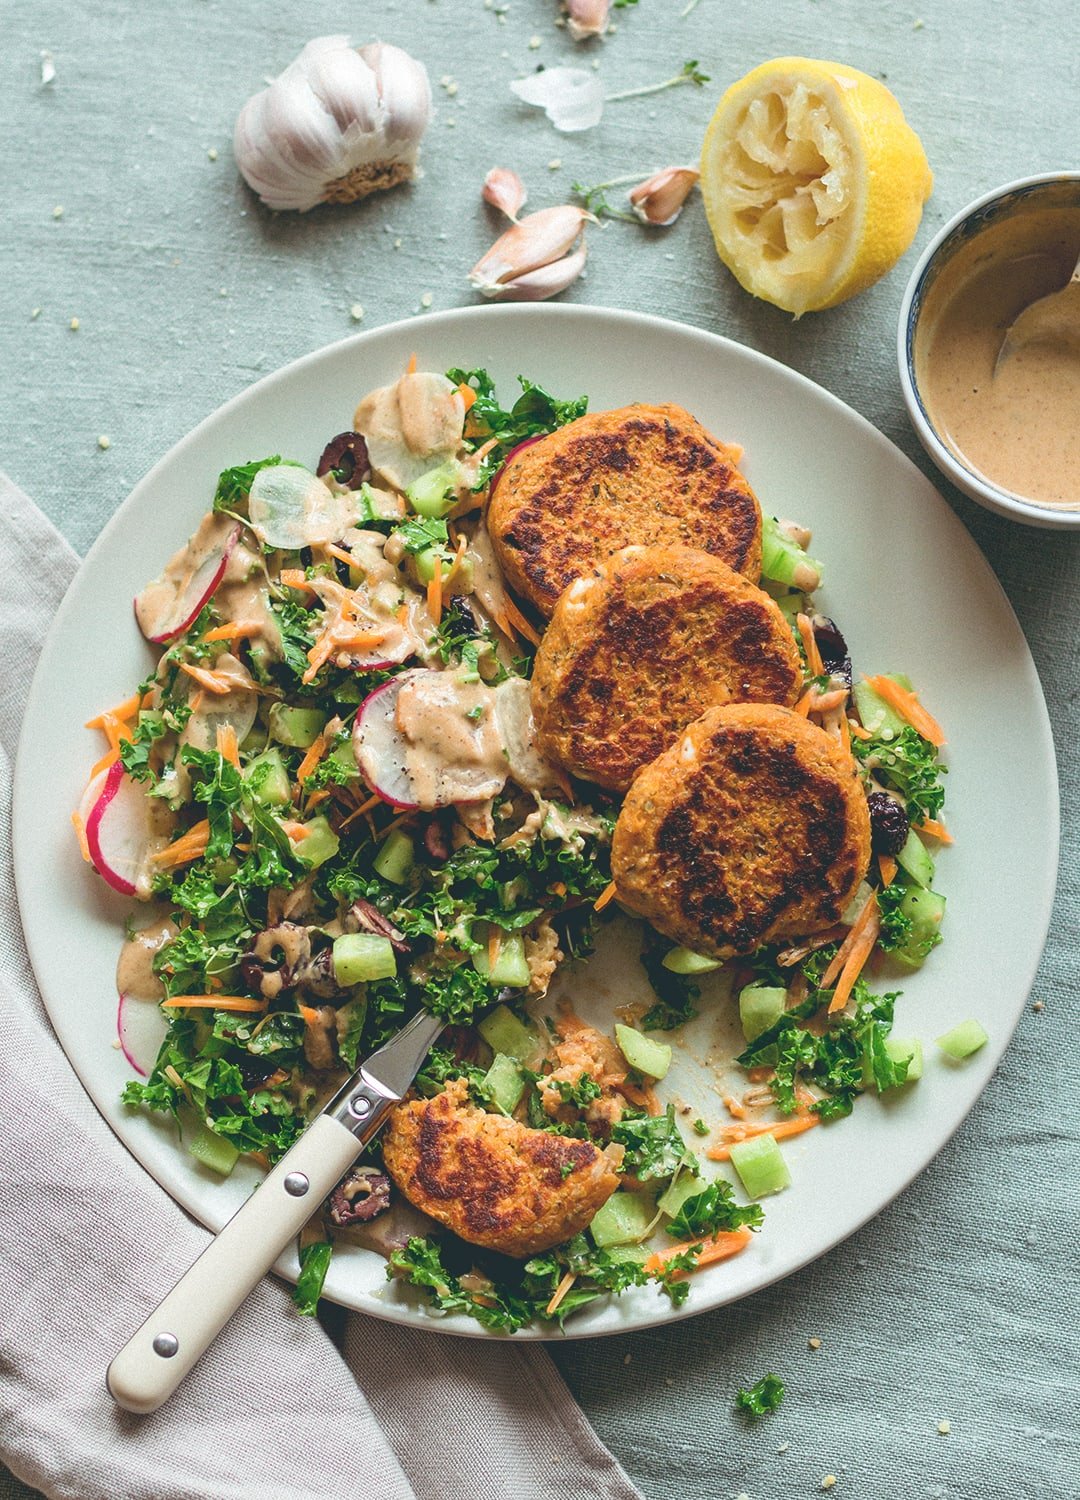 Sweet Potato Quinoa Patties with mixed salad and tahini dressing. This recipe is vegan, gluten-free, and totally amazing! You'll love it. | thehealthfulideas.com